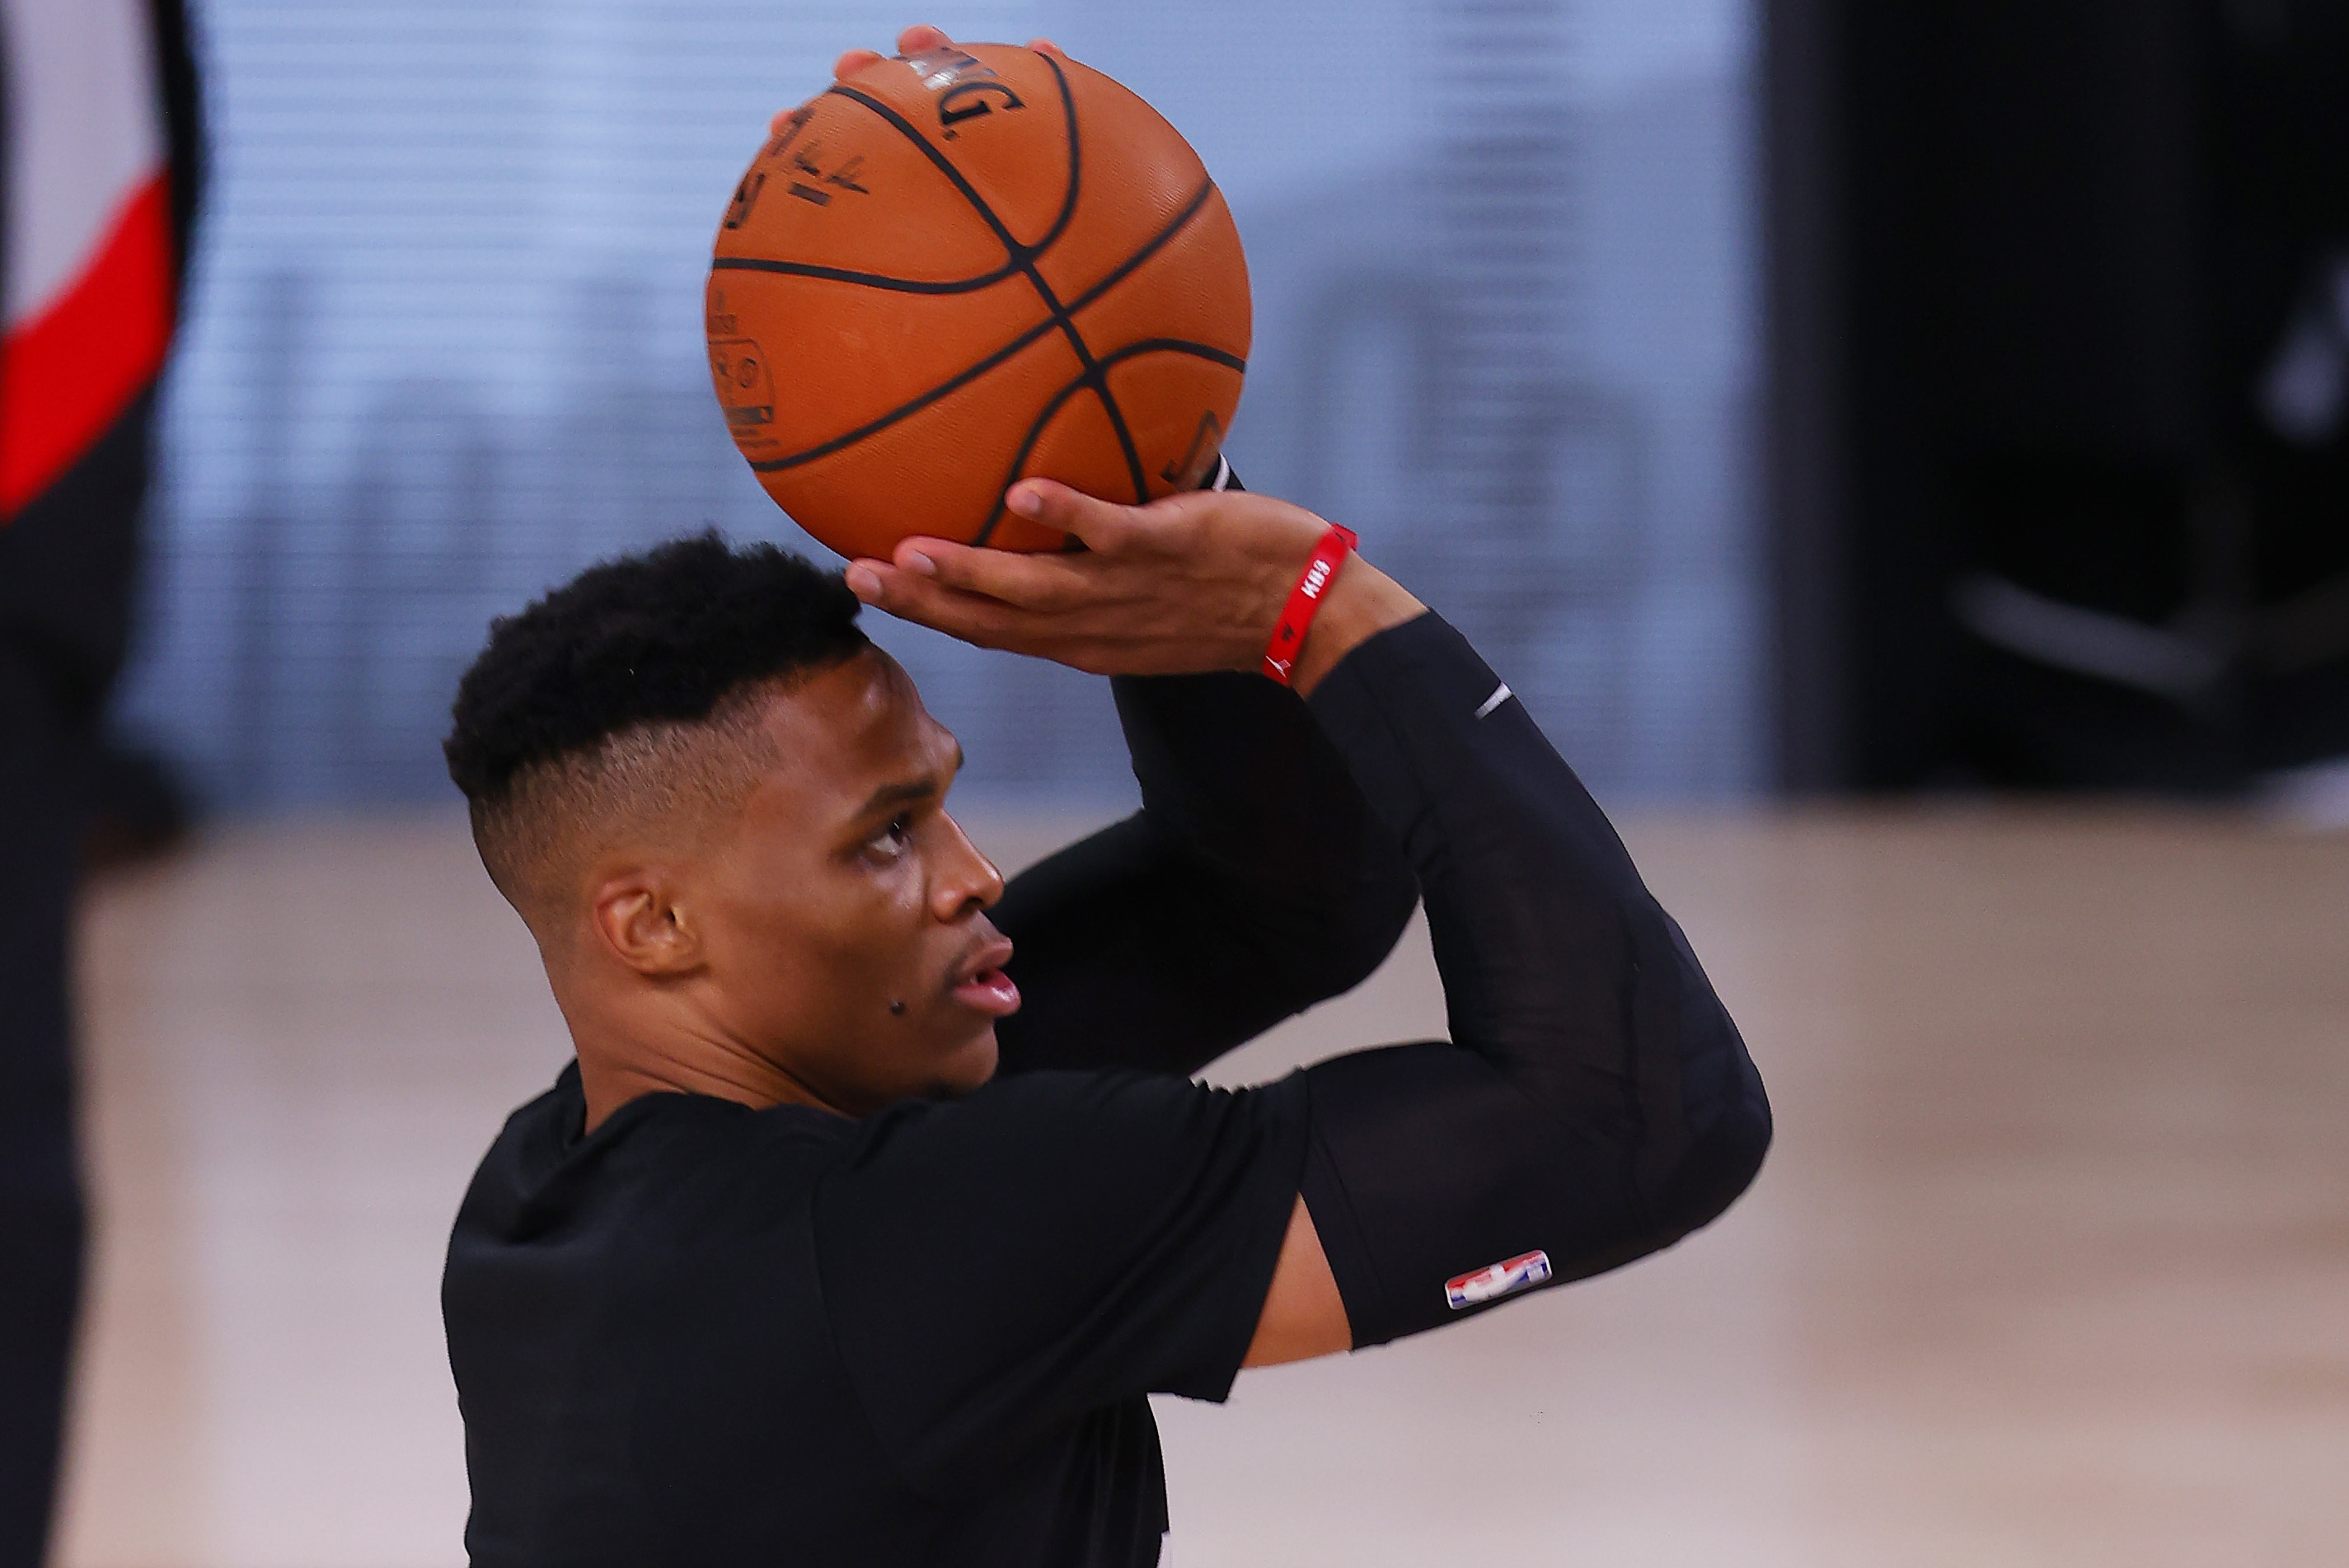 NBA: Westbrook will wear No. 4 for the Wizards - Bullets Forever